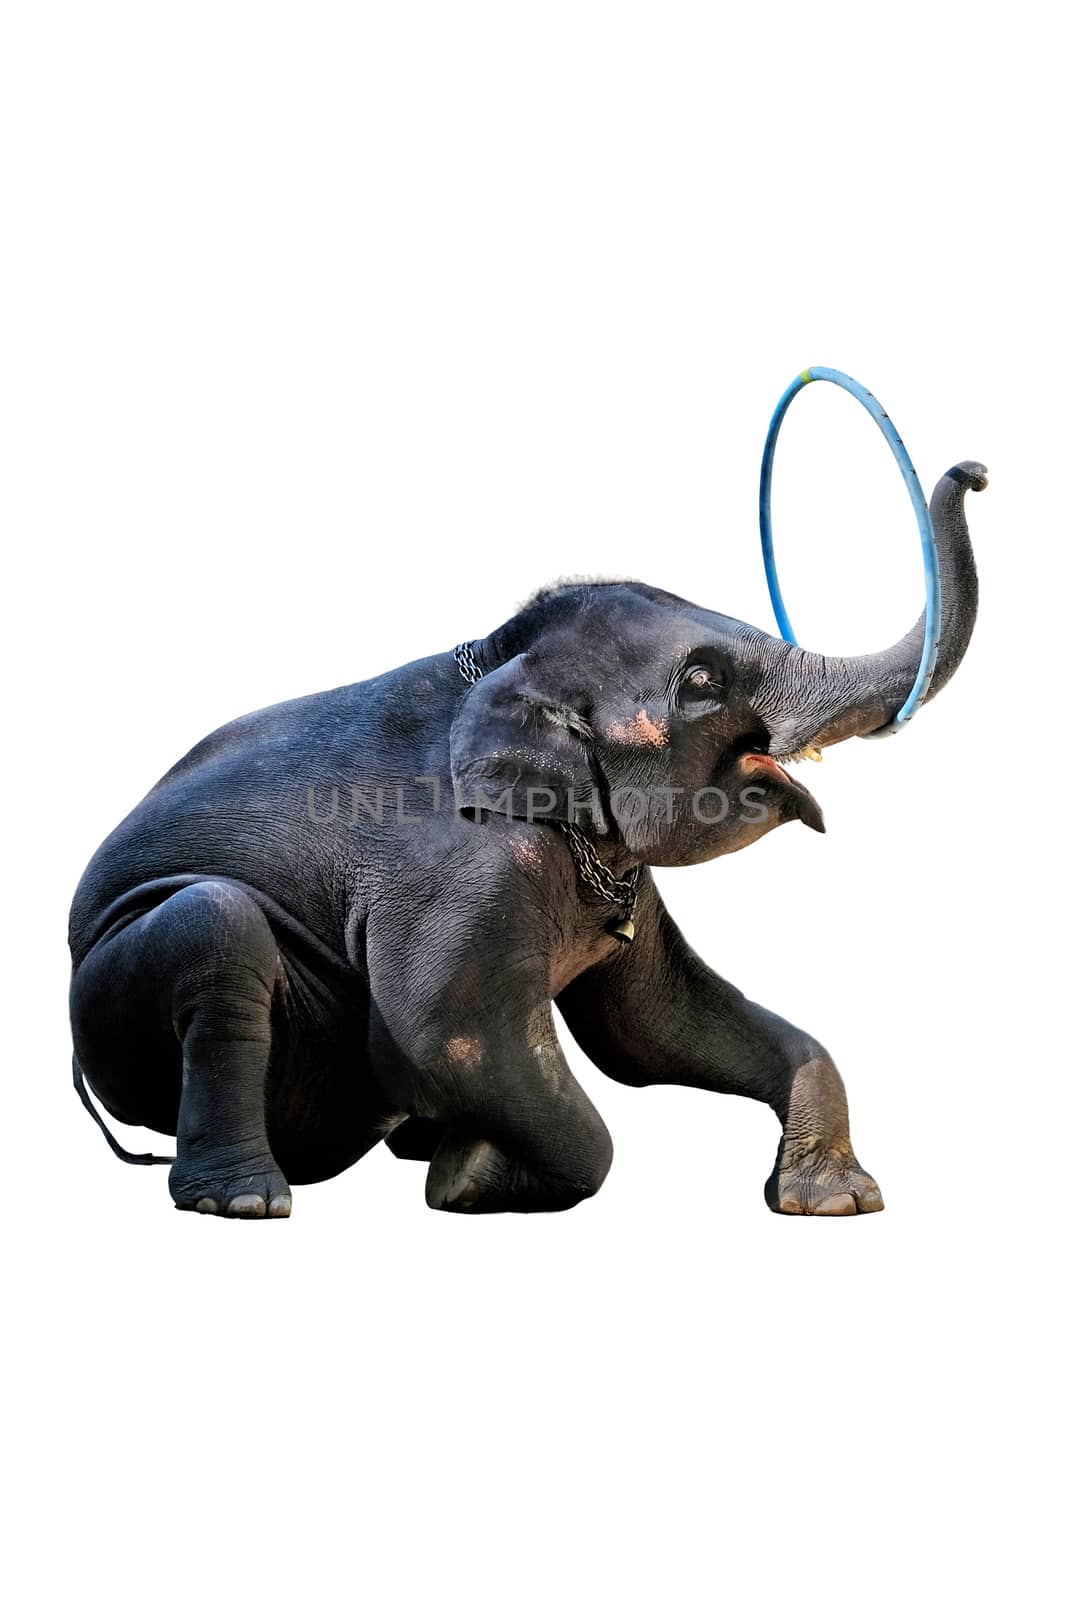 The elephants showing their skill of playing ,hula hoop on white background with clipping path